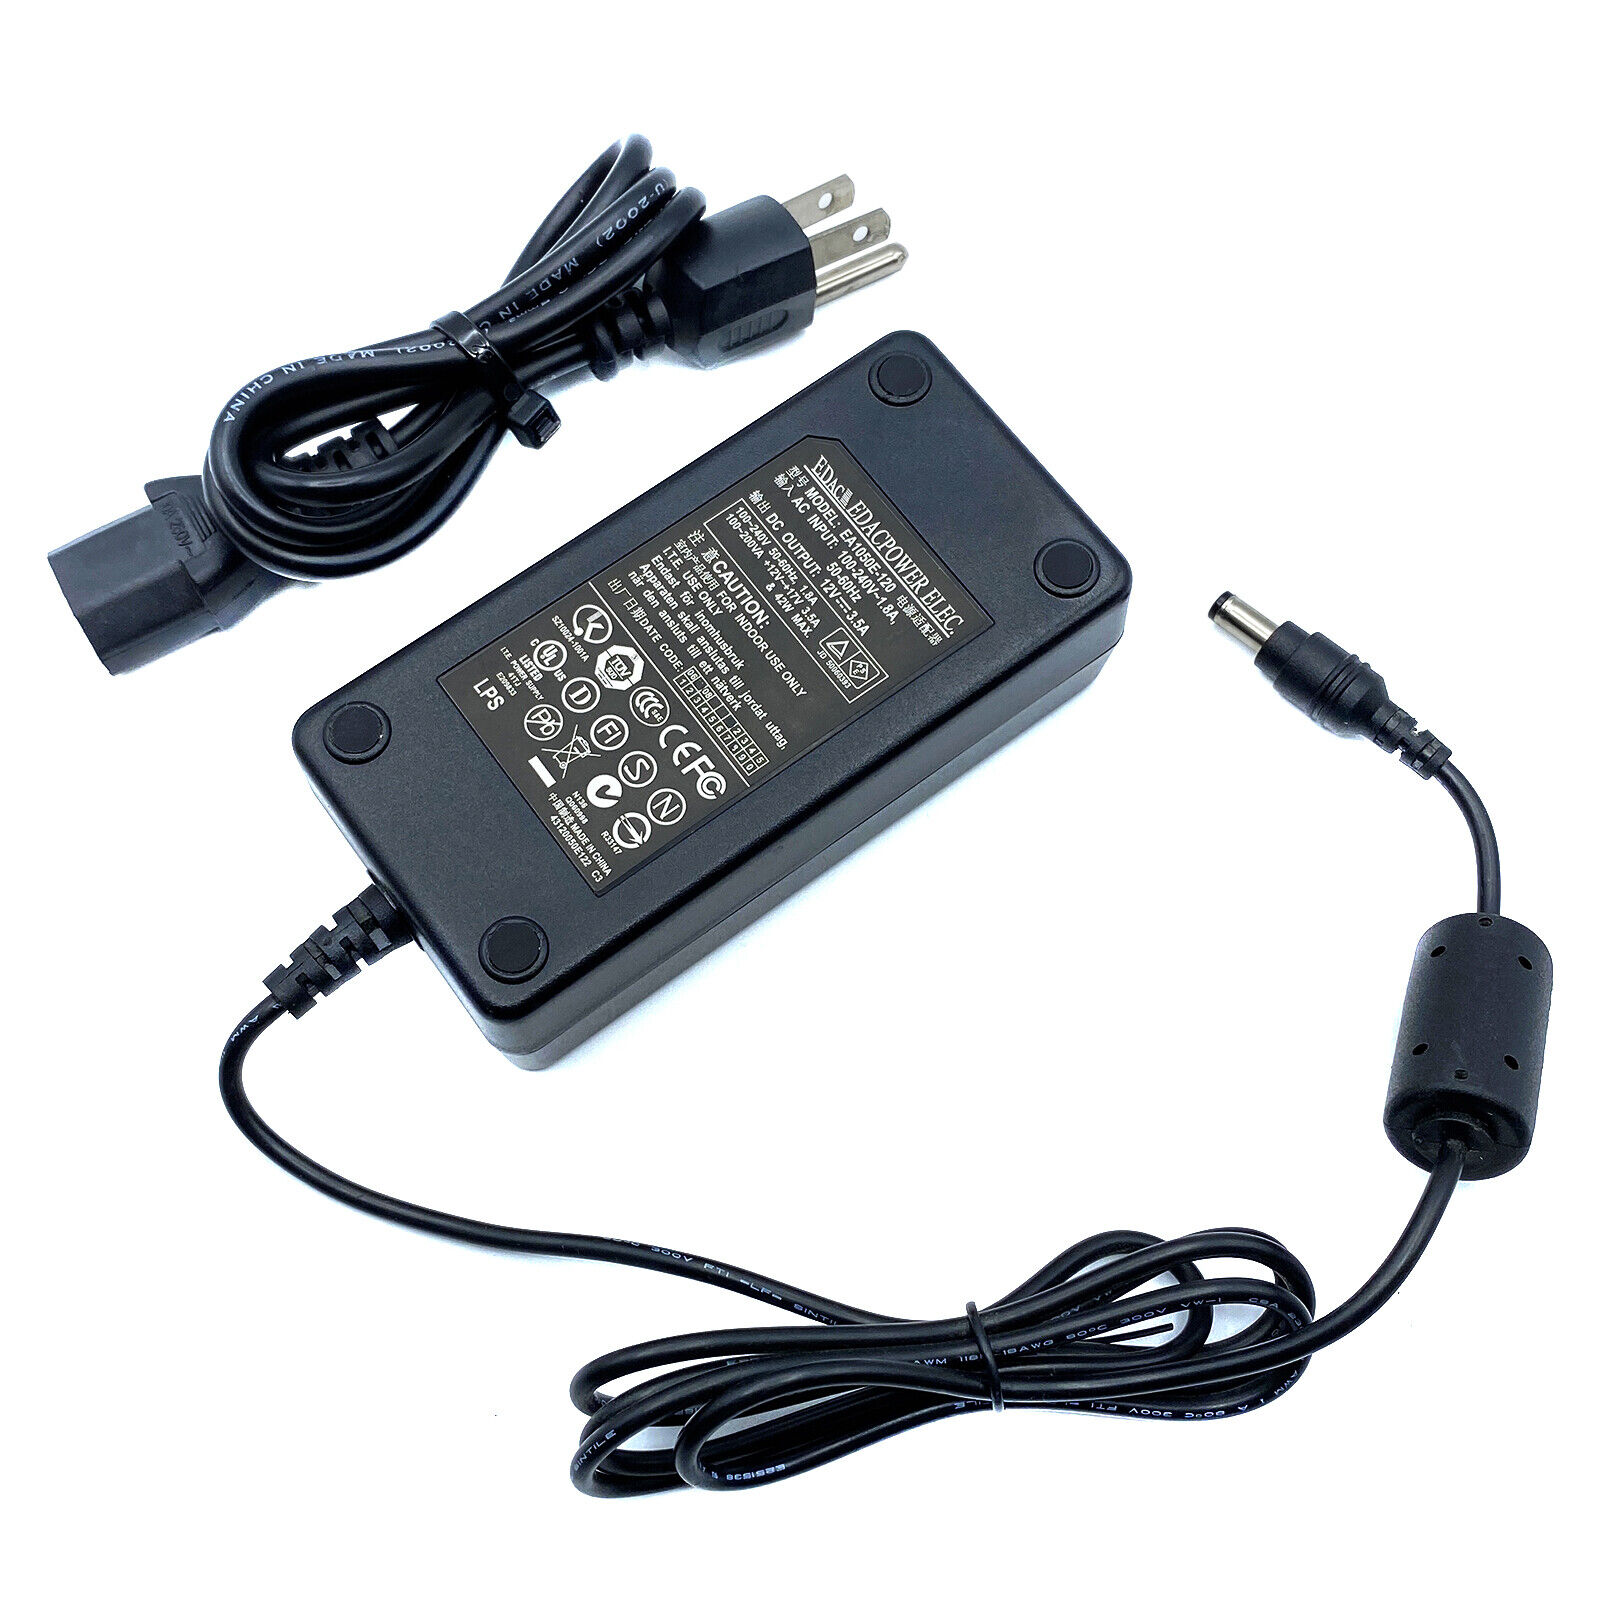 Genuine Edac AC Adapter Charger for FSP QP-3100 Terminal w/Cord